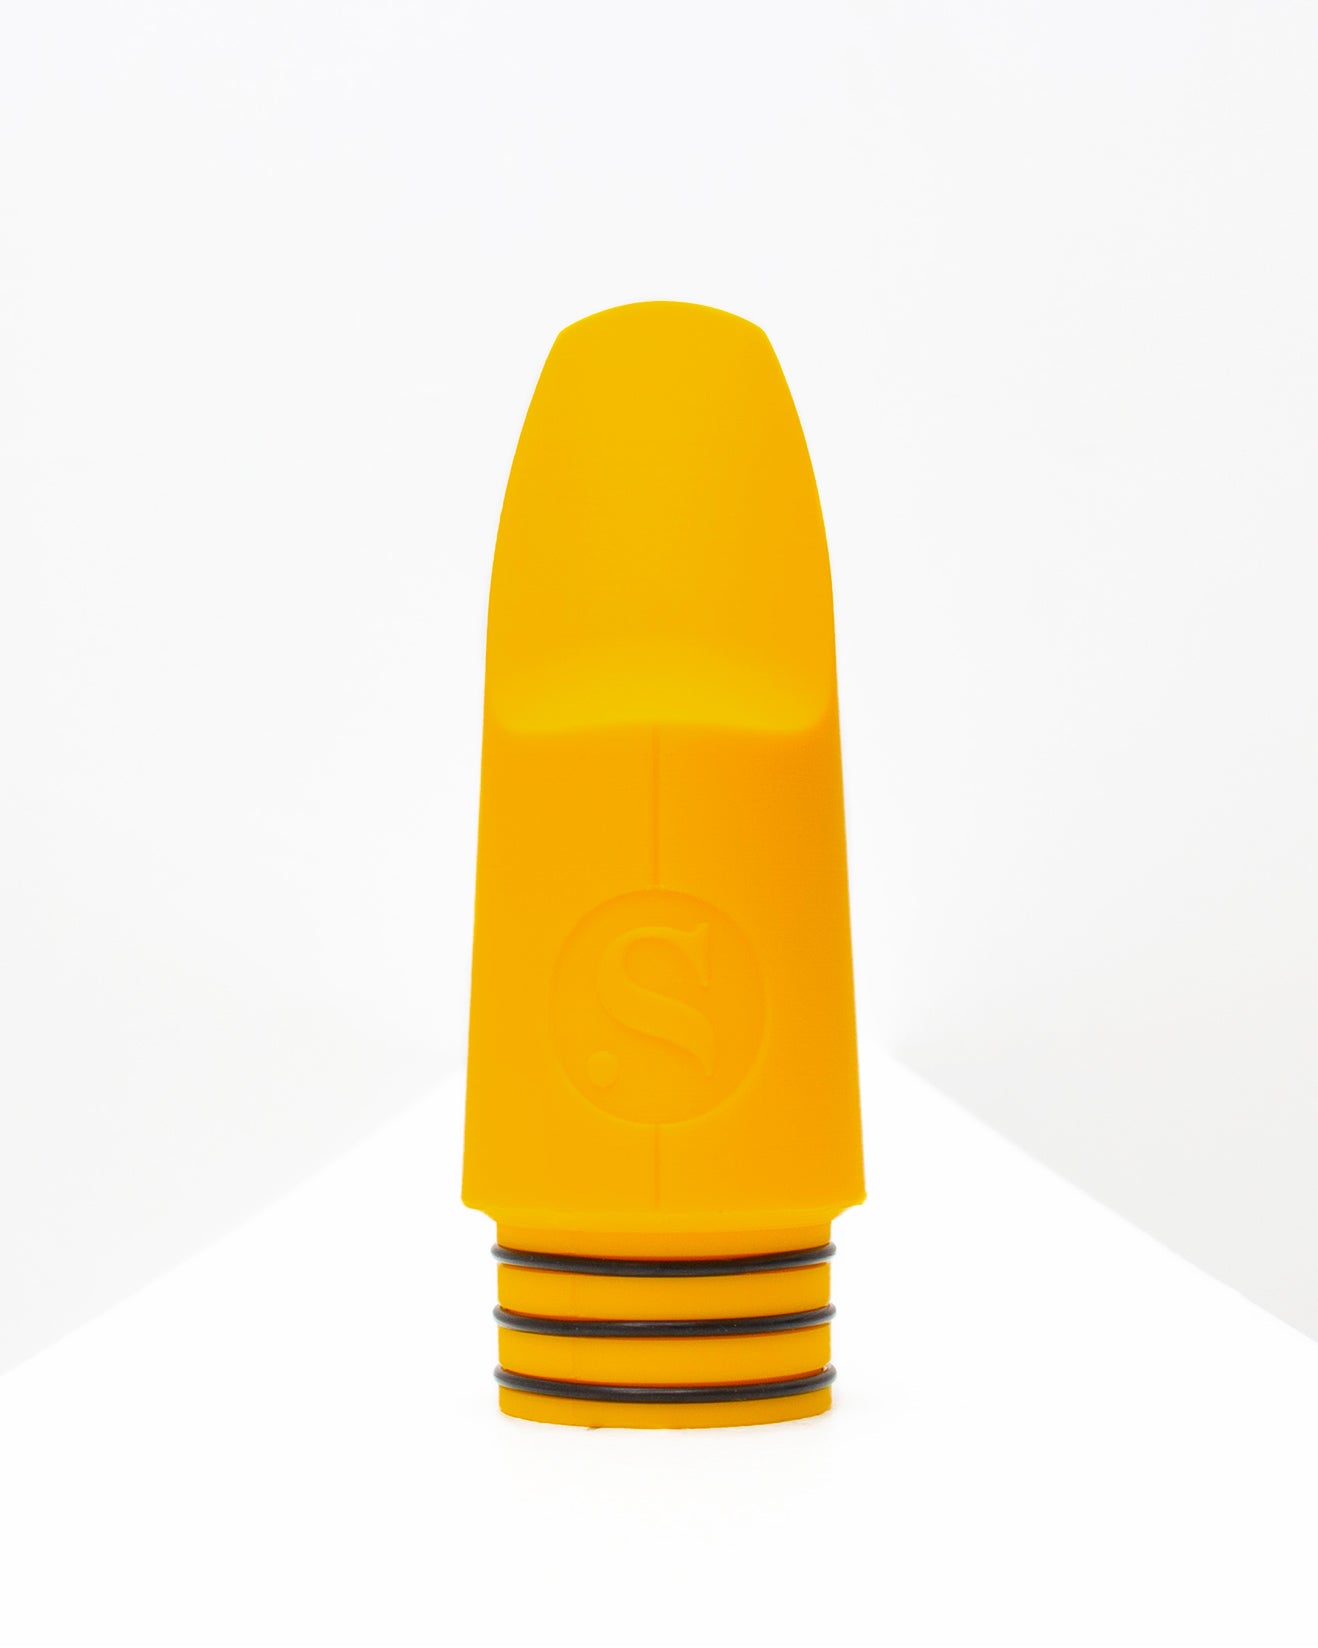 Bass Signature Clarinet mouthpiece - Insaneintherain by Syos - Mellow Yellow